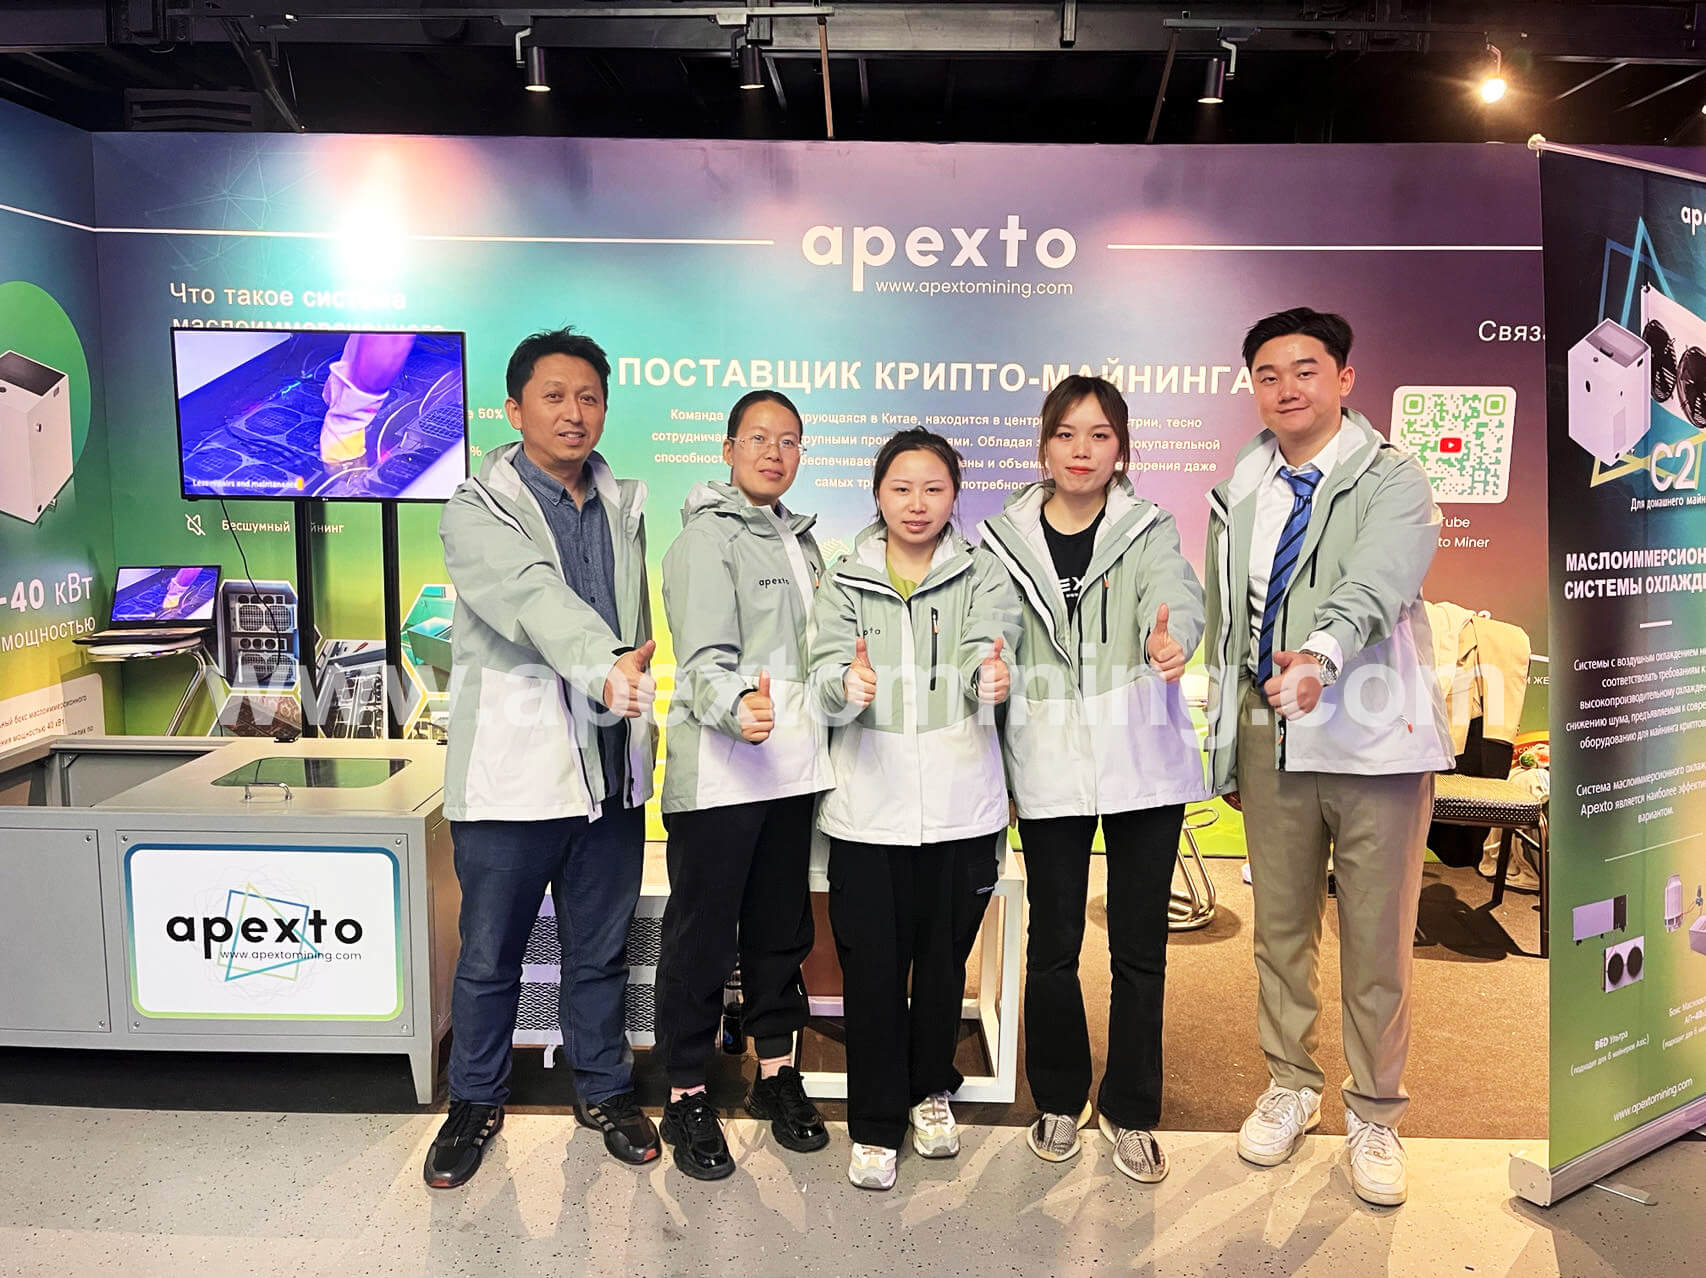 APEXTO Participates in Cryptocurrency Exhibitions to Provide Customers with High-Quality and Personalized Services